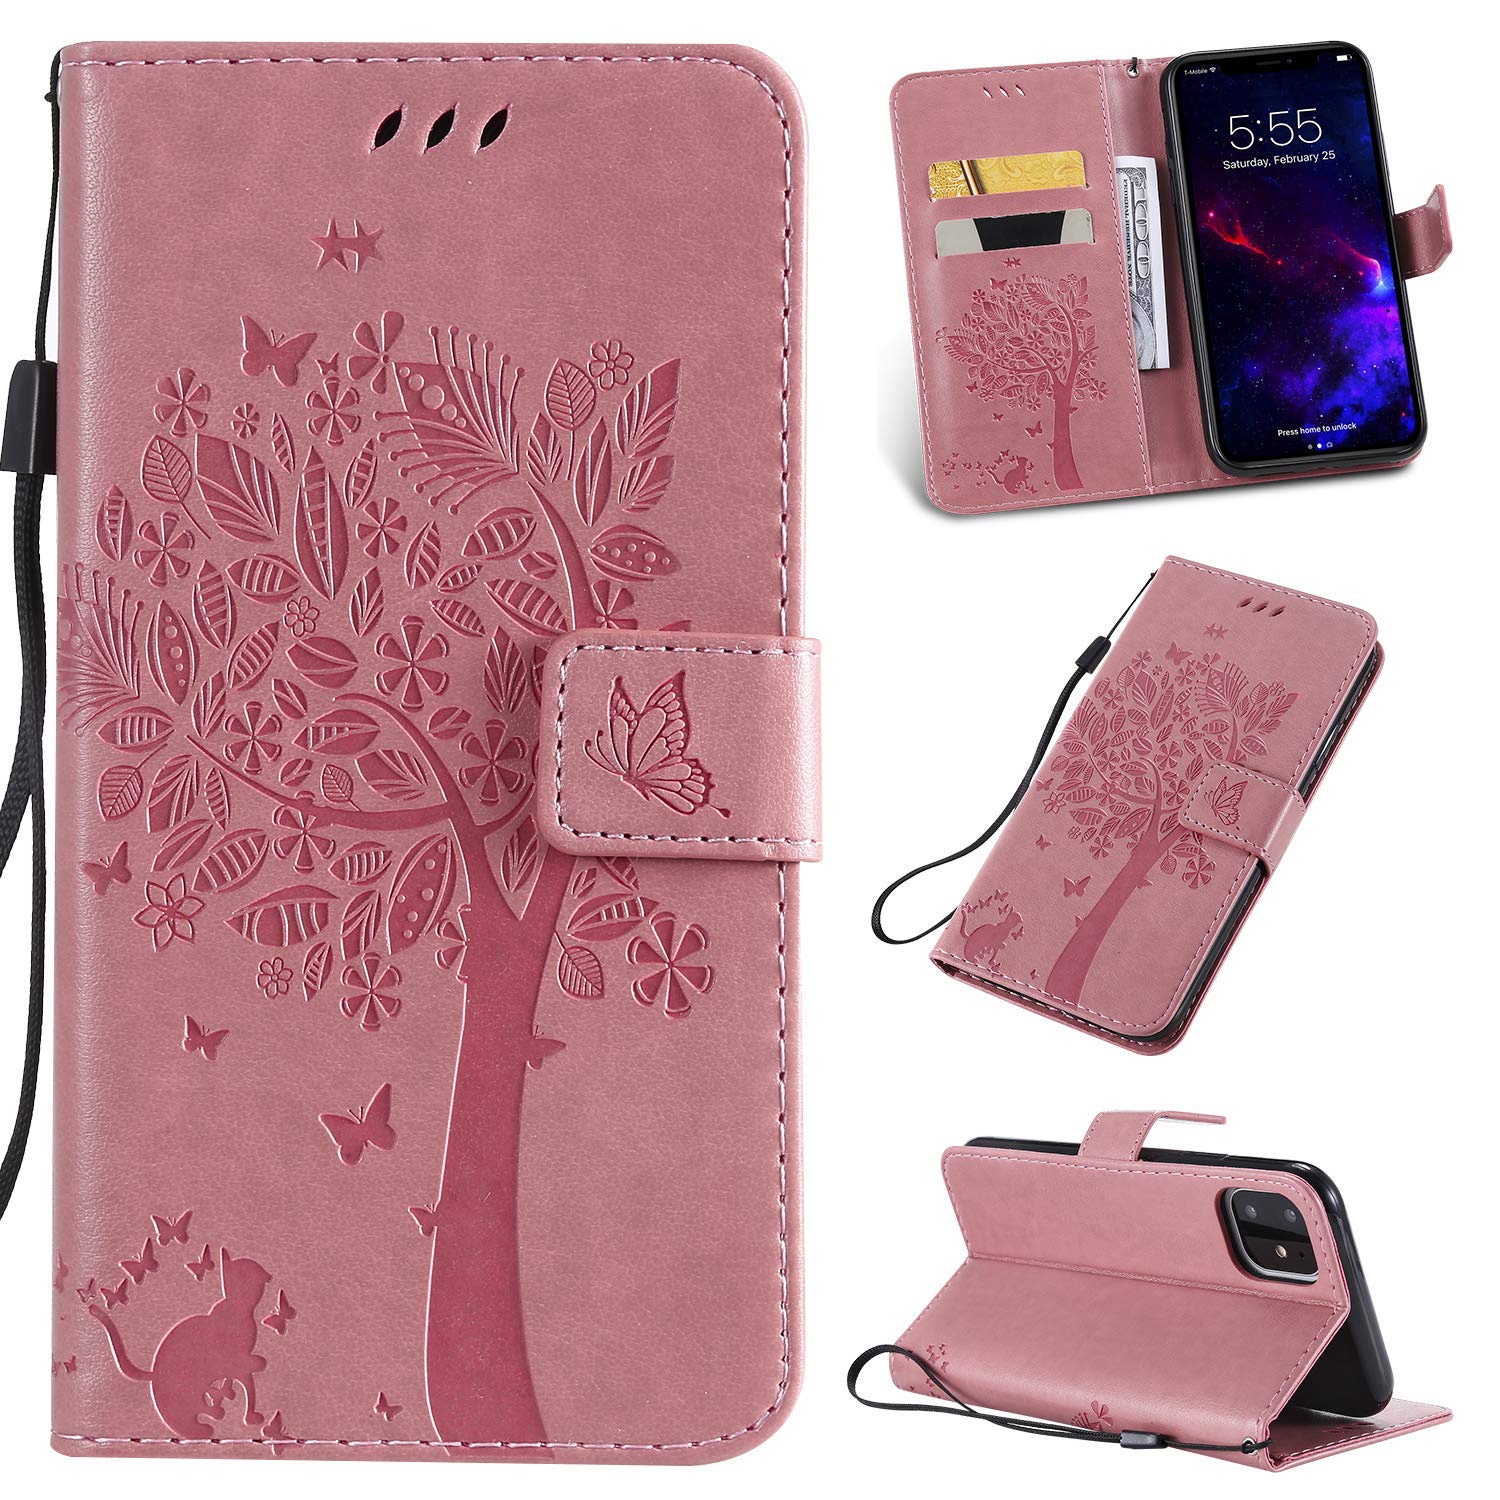 NOMO Iphone 11 Case With Screen Protector,Iphone 11 Wallet Case,Flip Case Pu Leather Emboss Tree Cat Flowers Folio Magnetic Kickstand